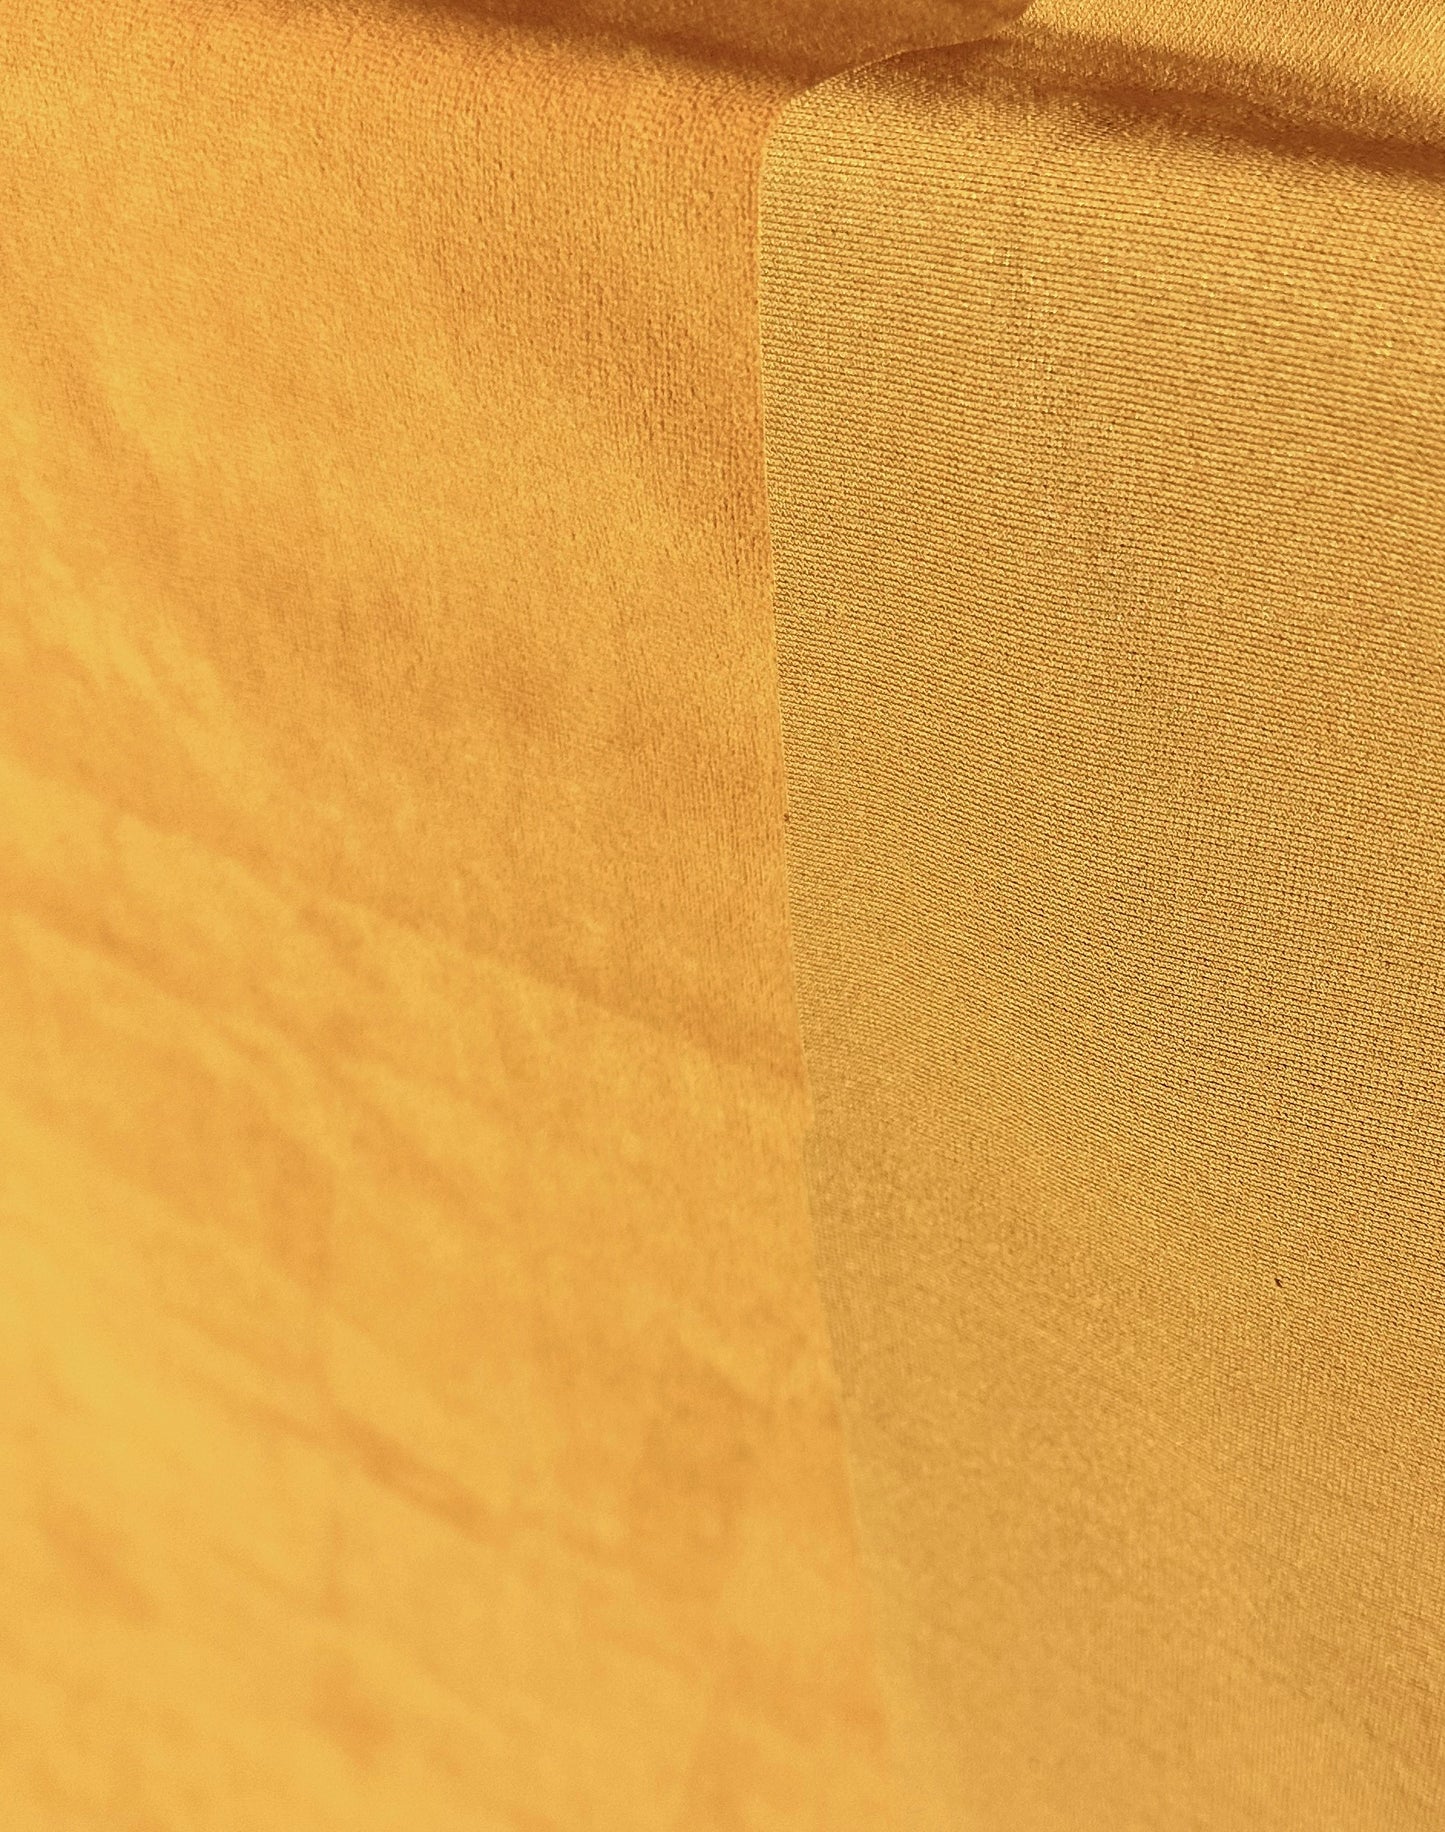 CRYPTON SUEDE UPHOLSTERY FABRIC COLOR DIJON GOLD MUSTARD 54" WIDE BY THE YARD